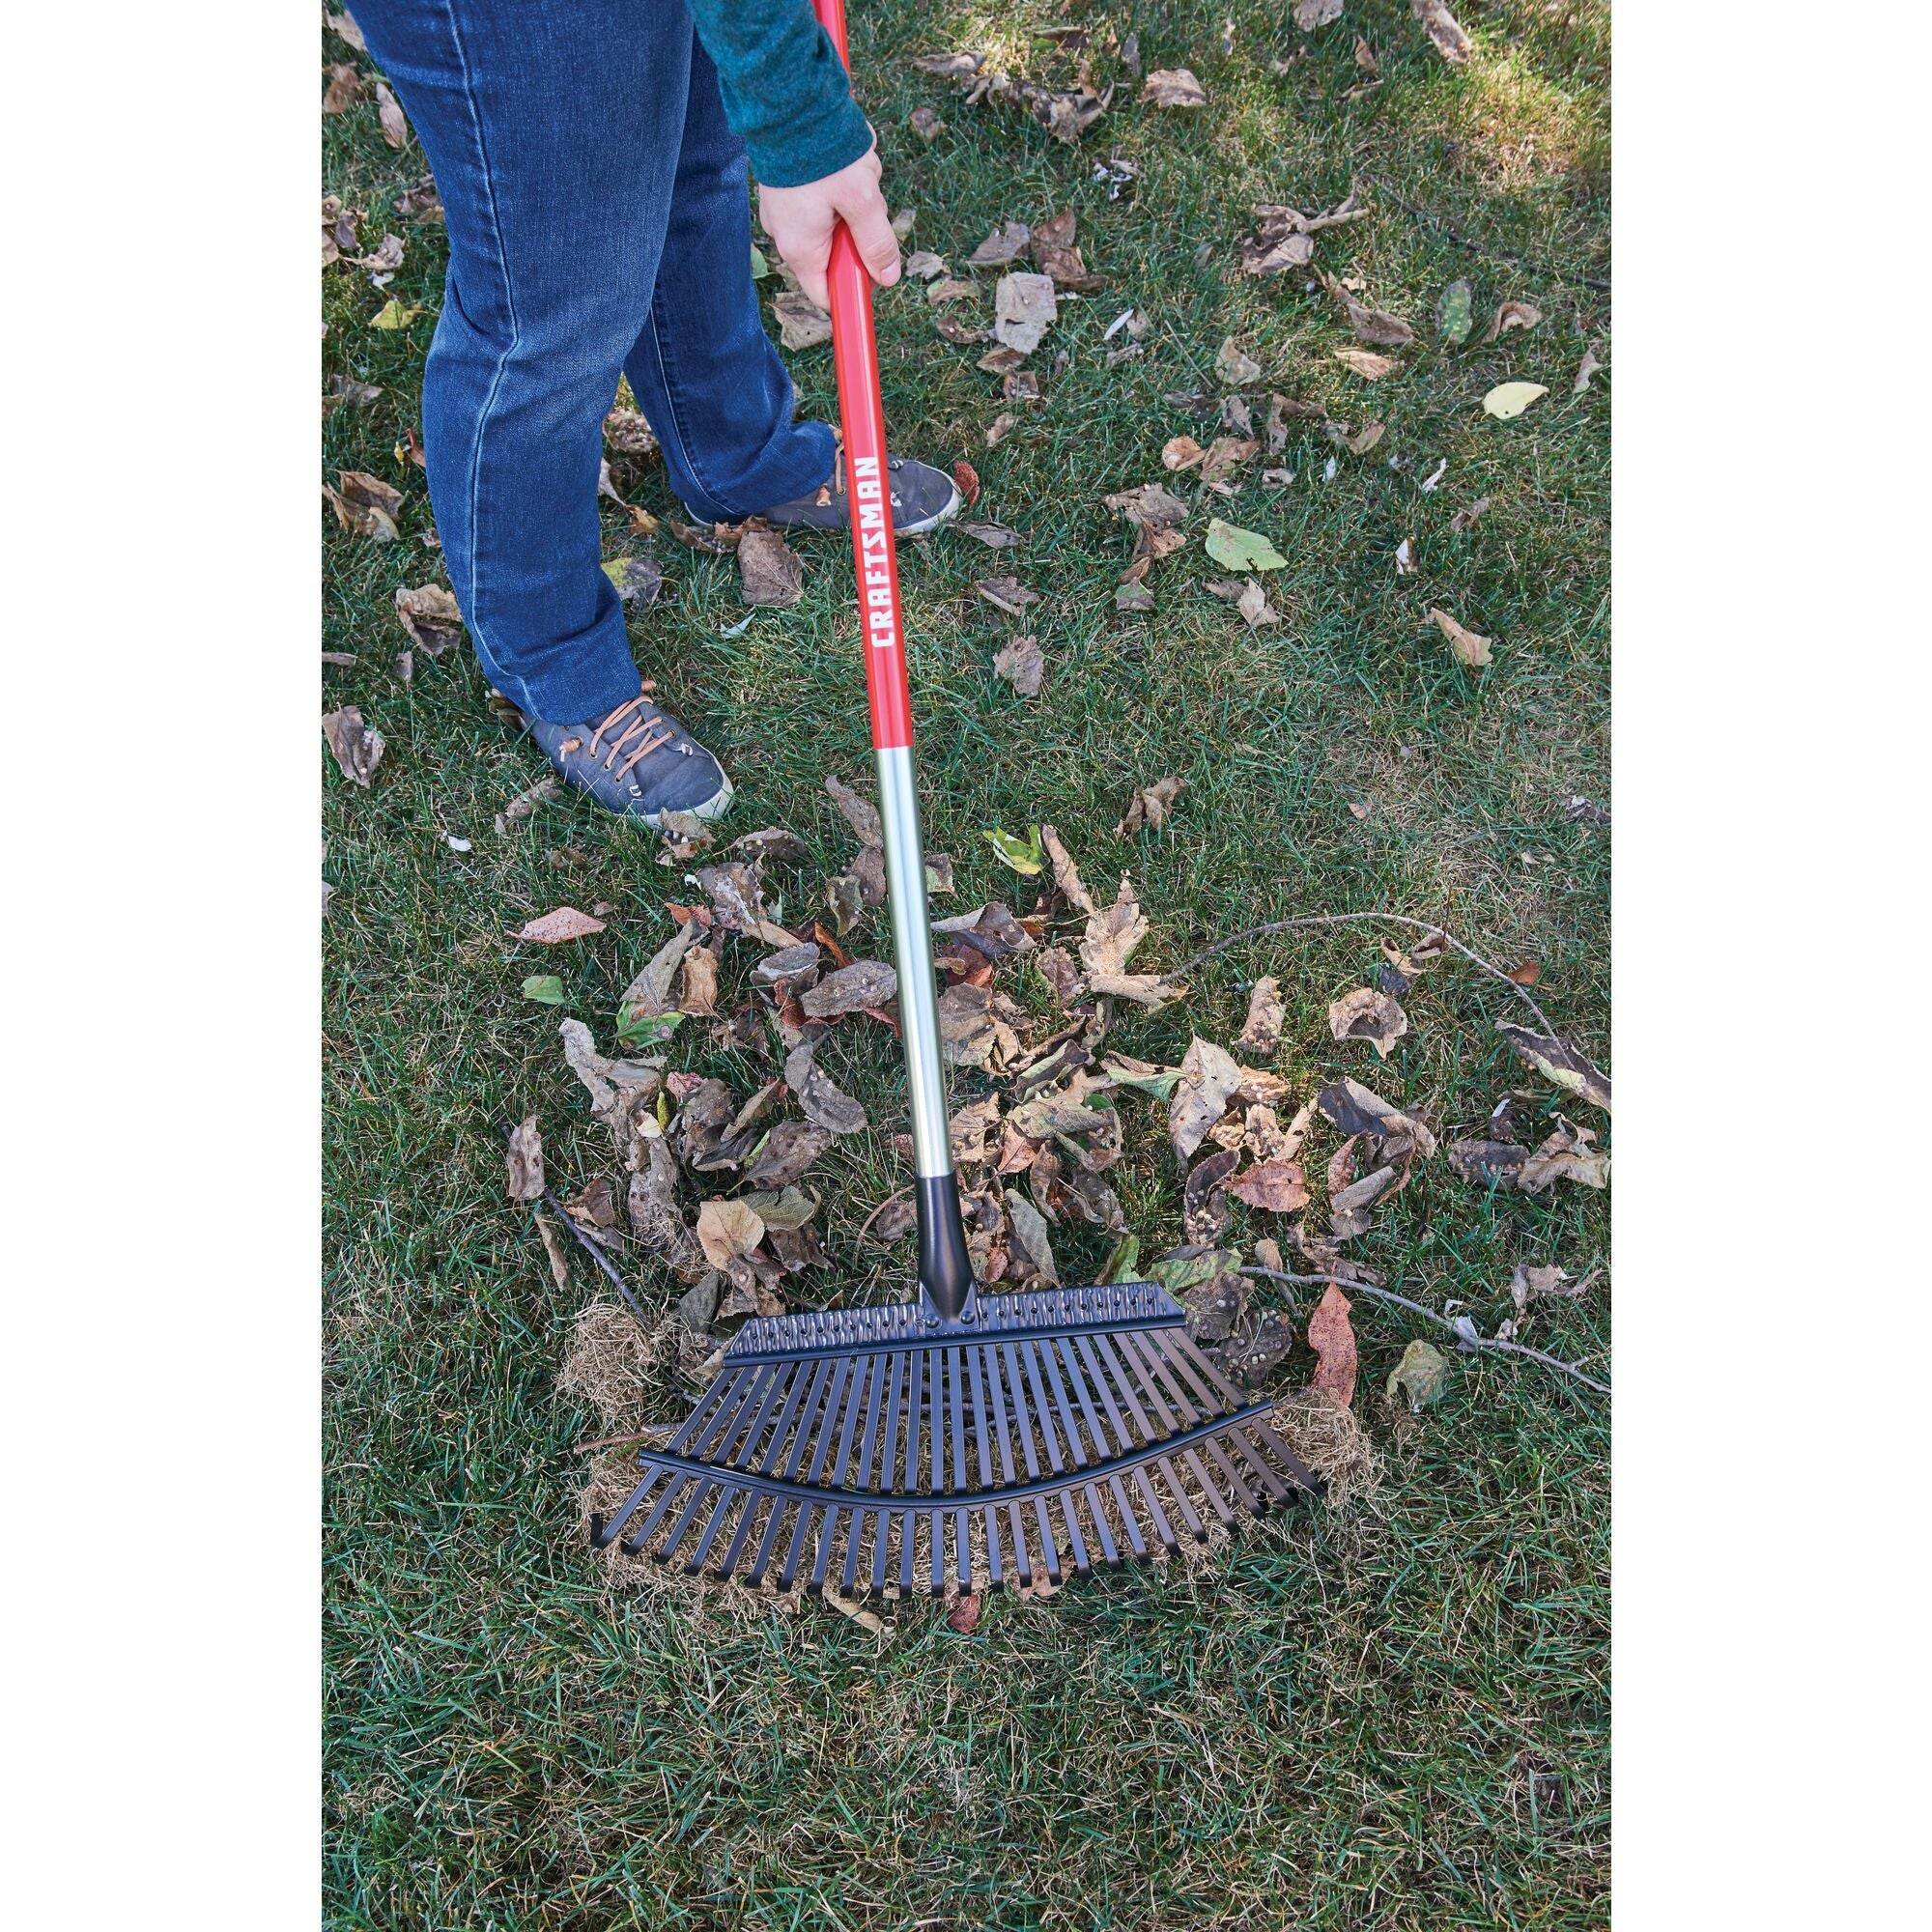 25 tine aluminum handle lawn rake being used to rake leaves from the ground.